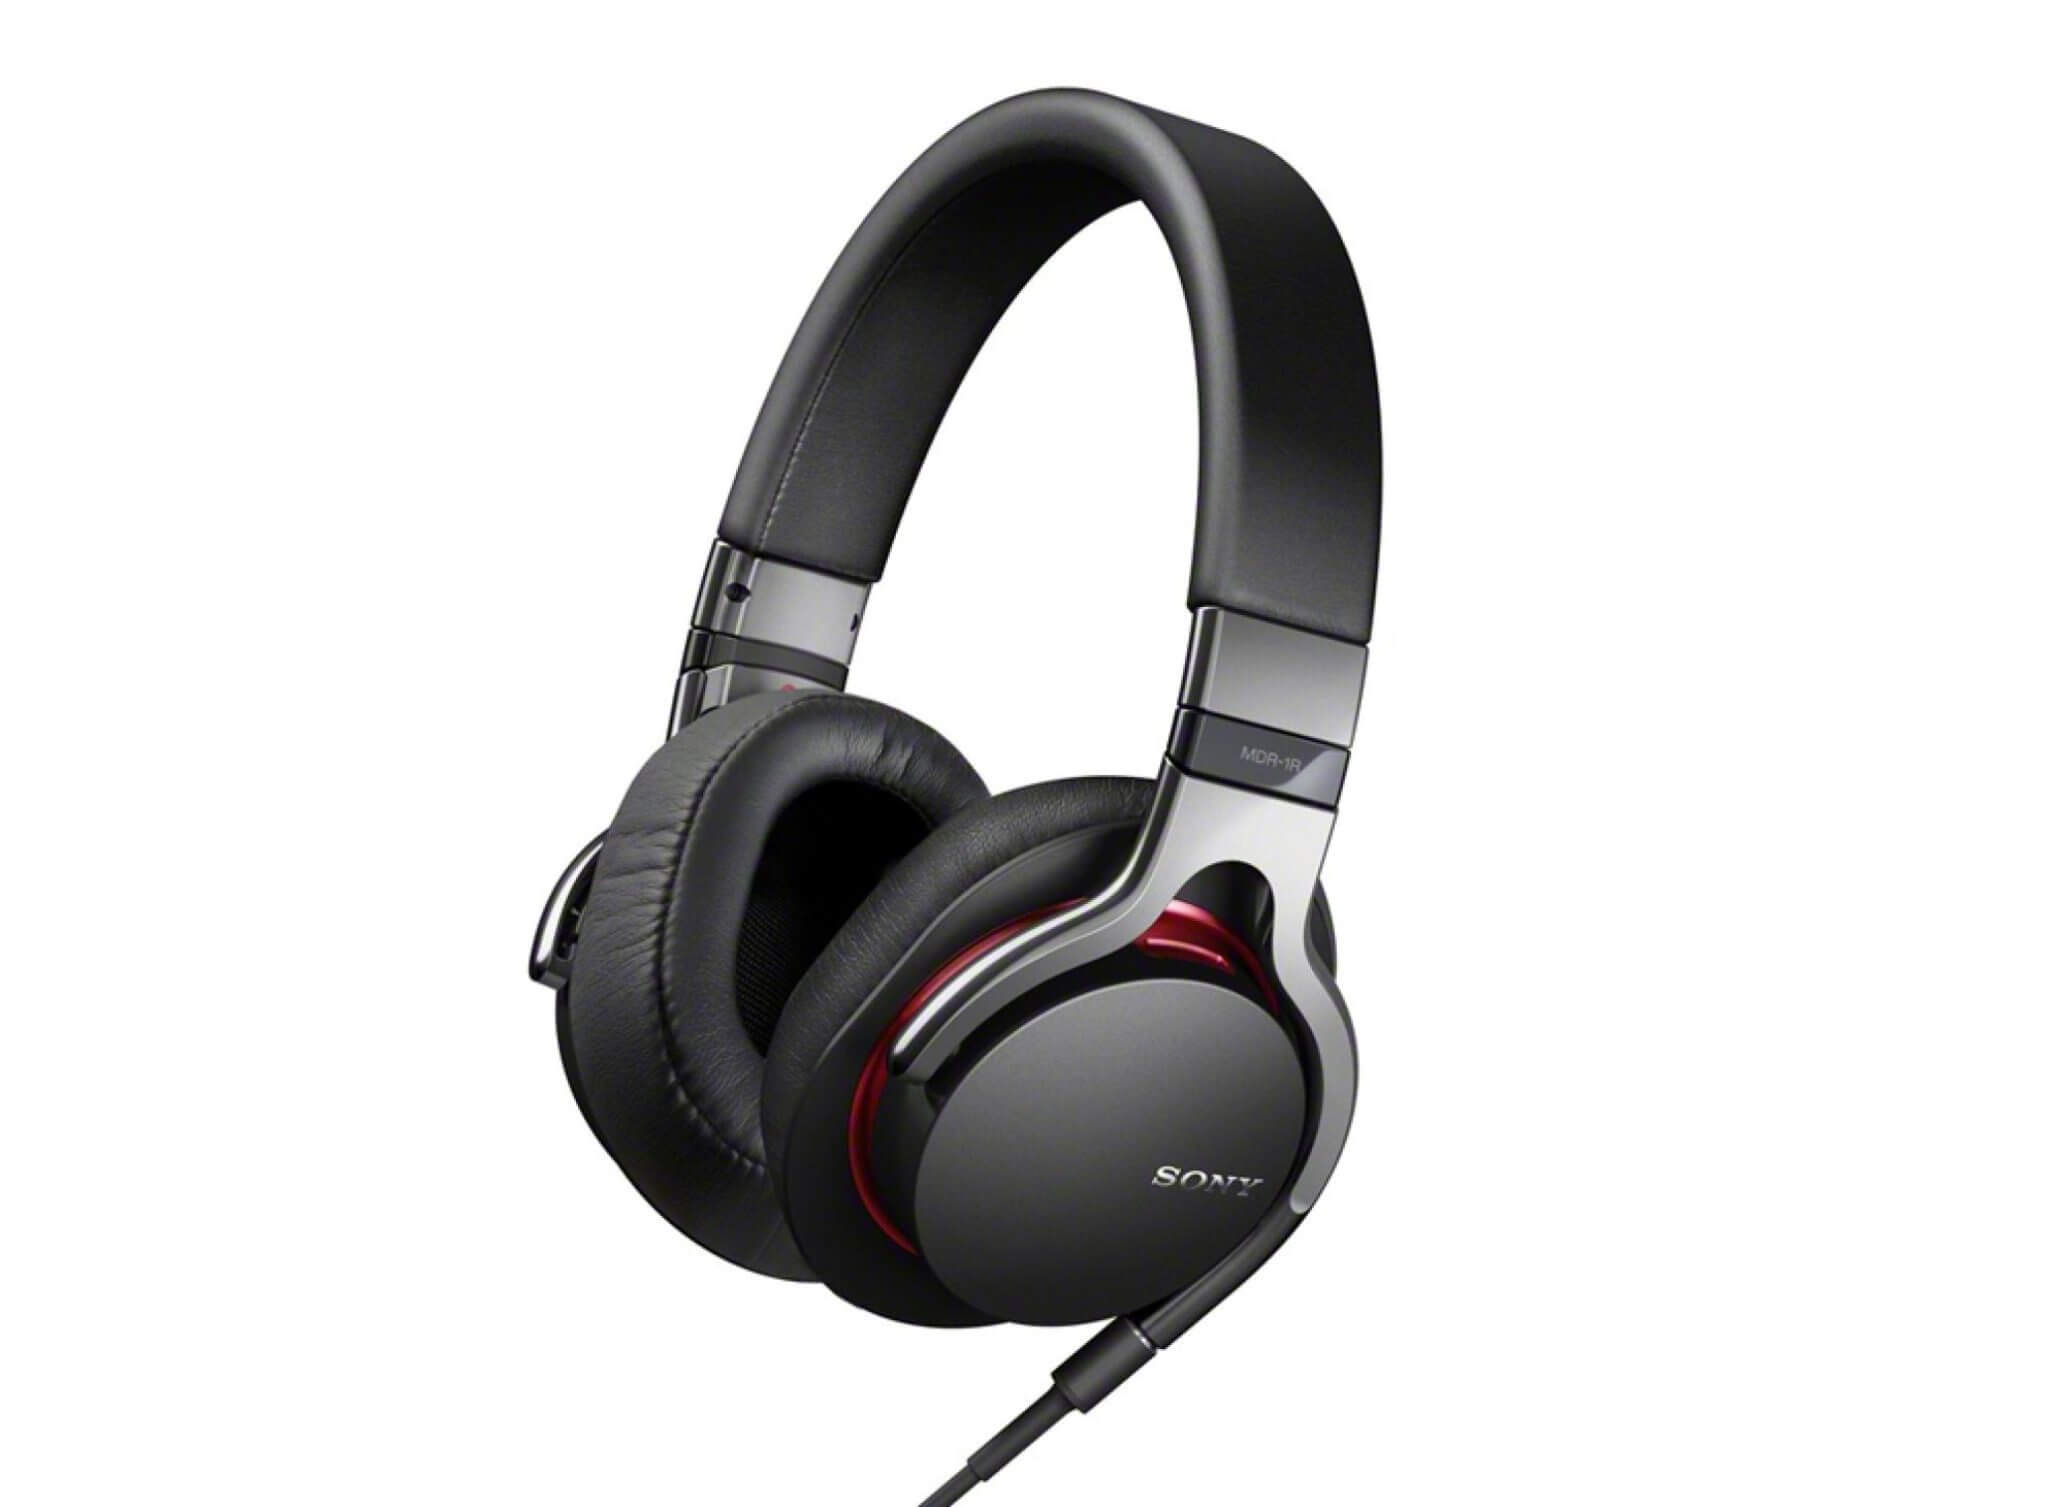 00rFpS3aEdhBCVIhUkisHQ6 3.fit scale.size 2698x1517 scaled - best dj headphones